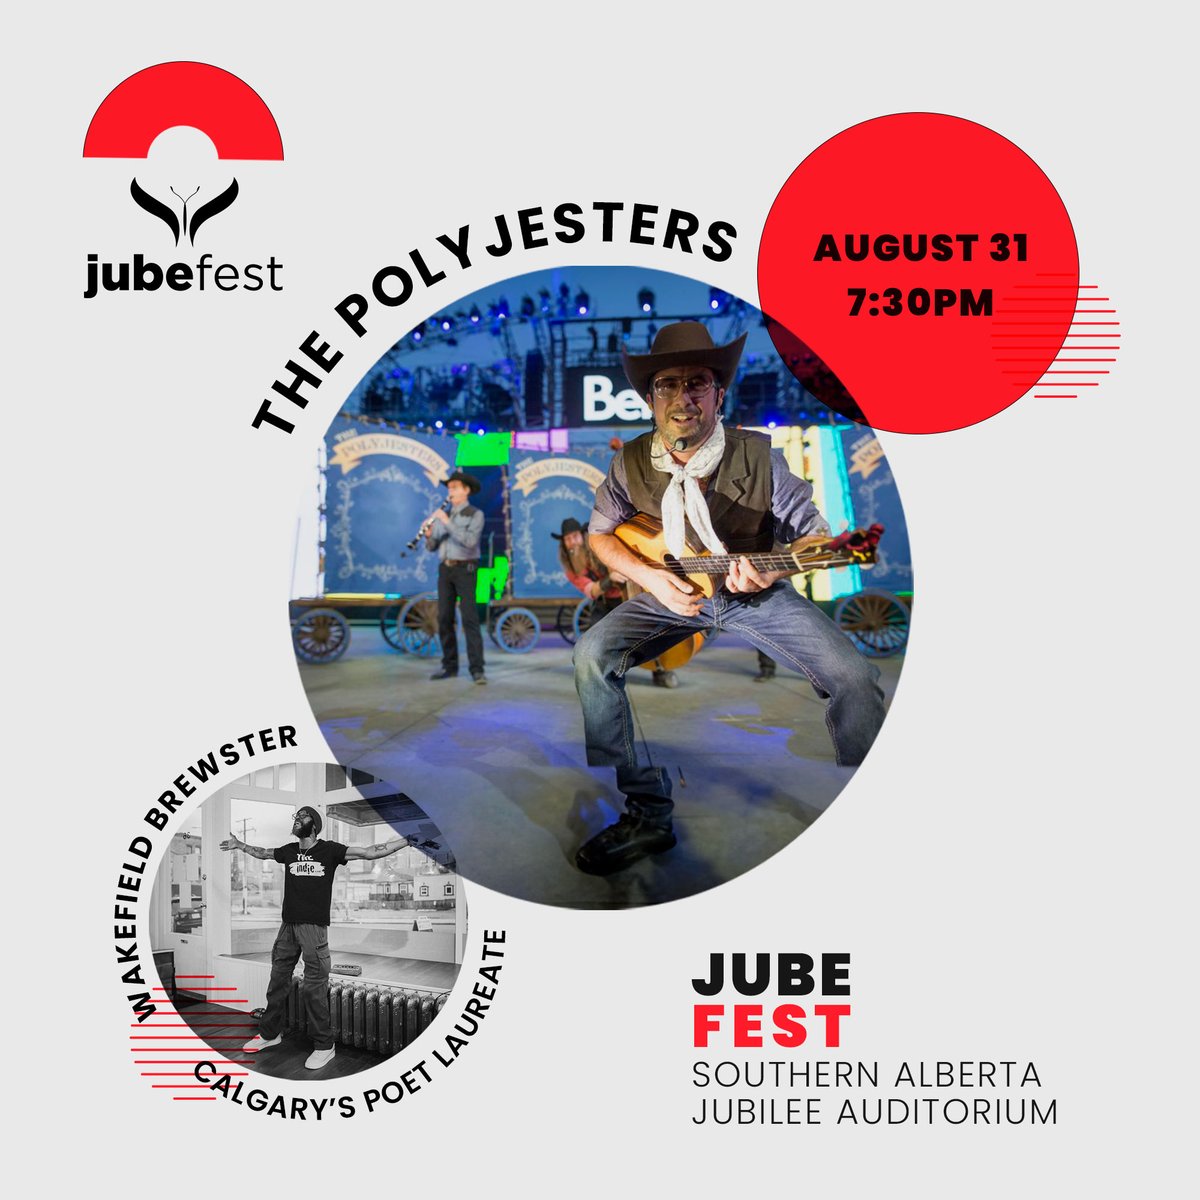 📢Important Update: Today's Polyjesters Jubefest concert moved indoors Exciting news: the Polyjesters concert is happening today! 🎶 However, the weather forces us to switch things up for your safety and comfort. We're moving the Polyjesters concert indoors. See you there!